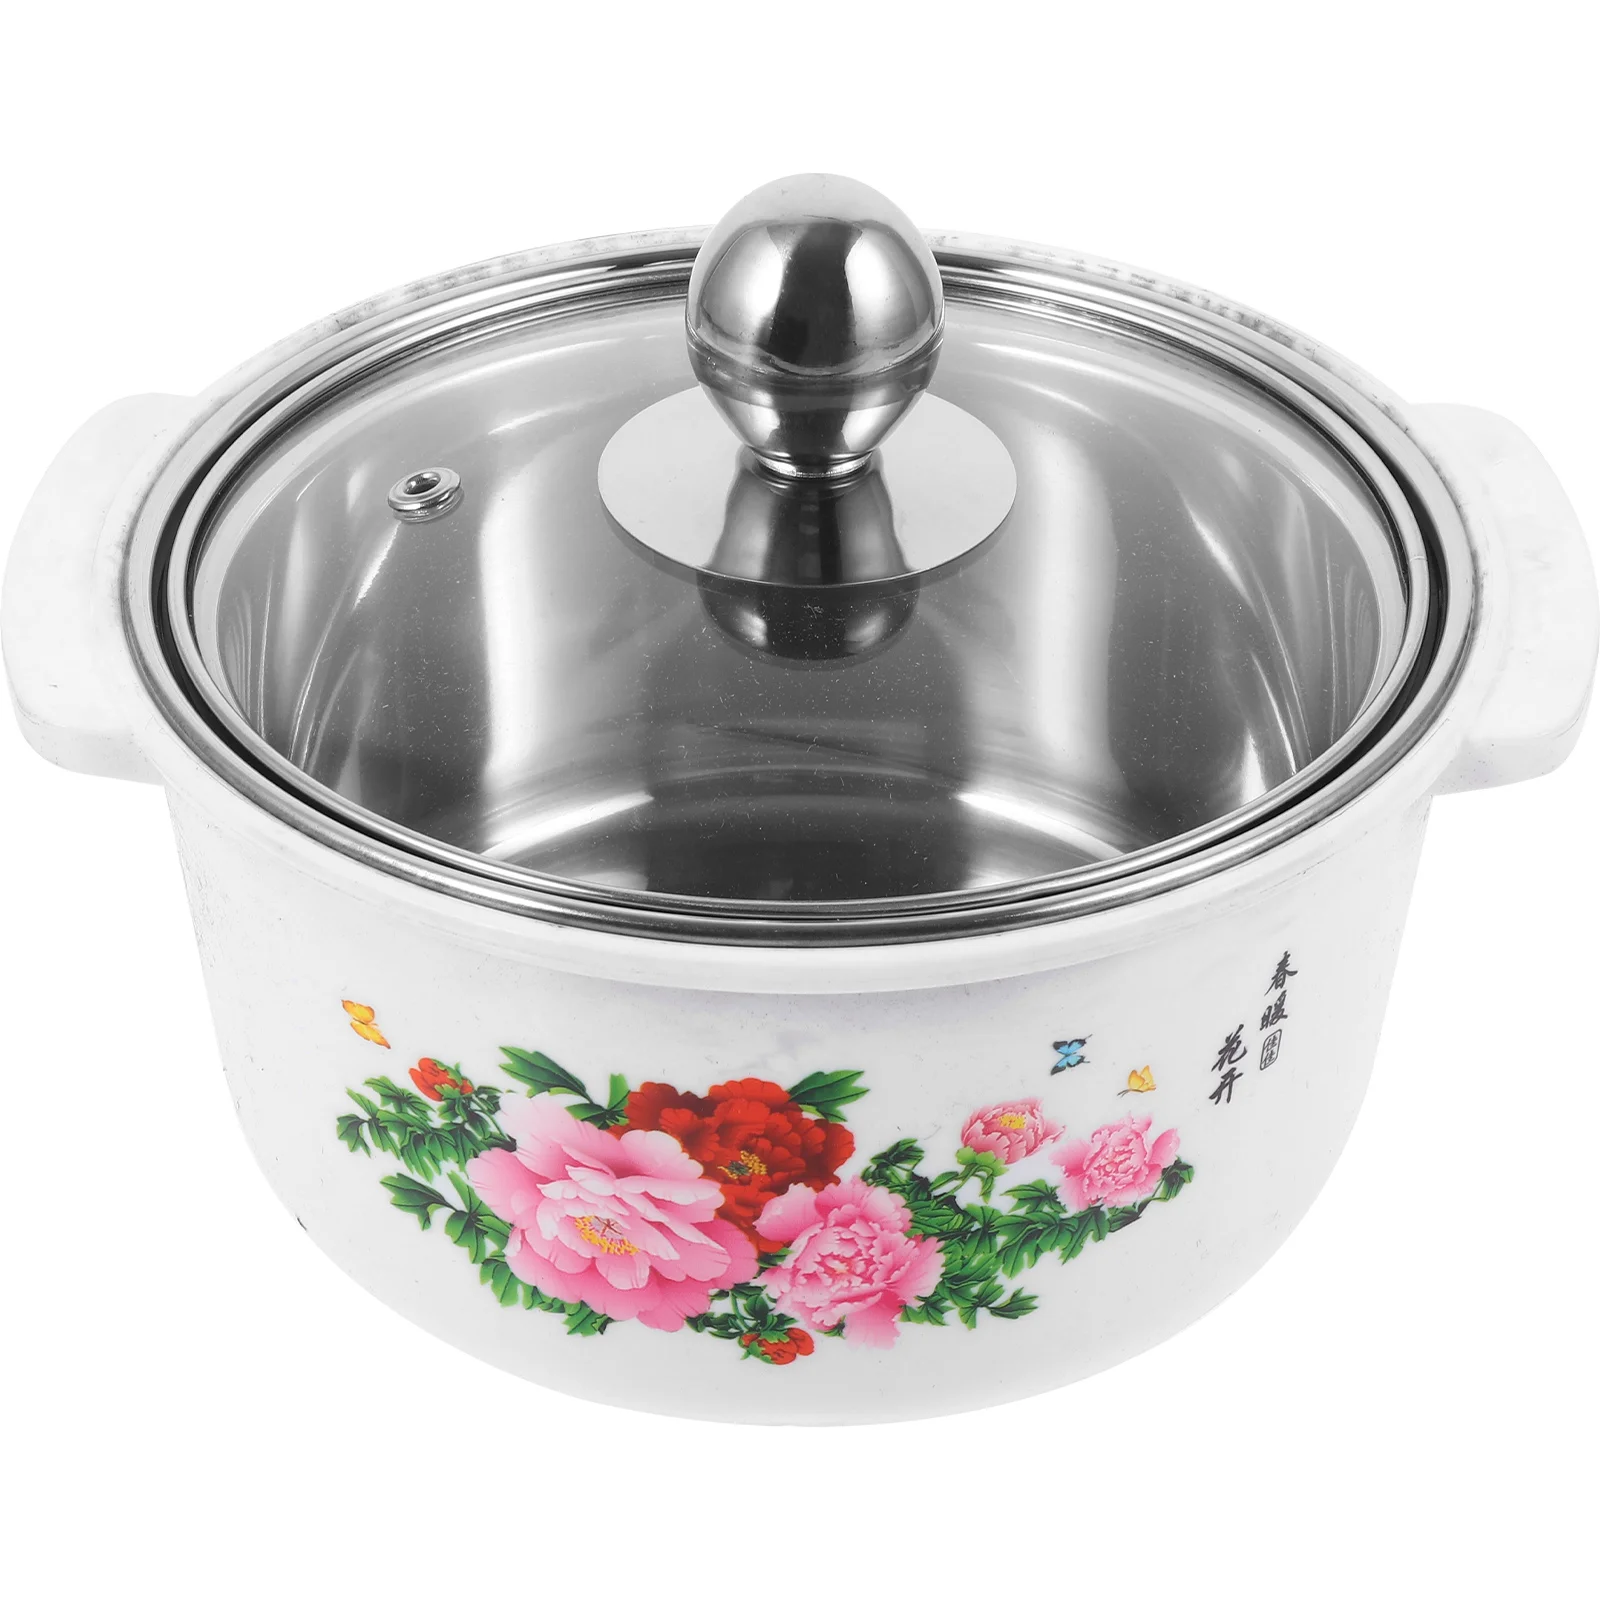 

Soup Pot With Cover Cooking Chafing Dish Small For Stove Top Stainless Steel Pasta Individual